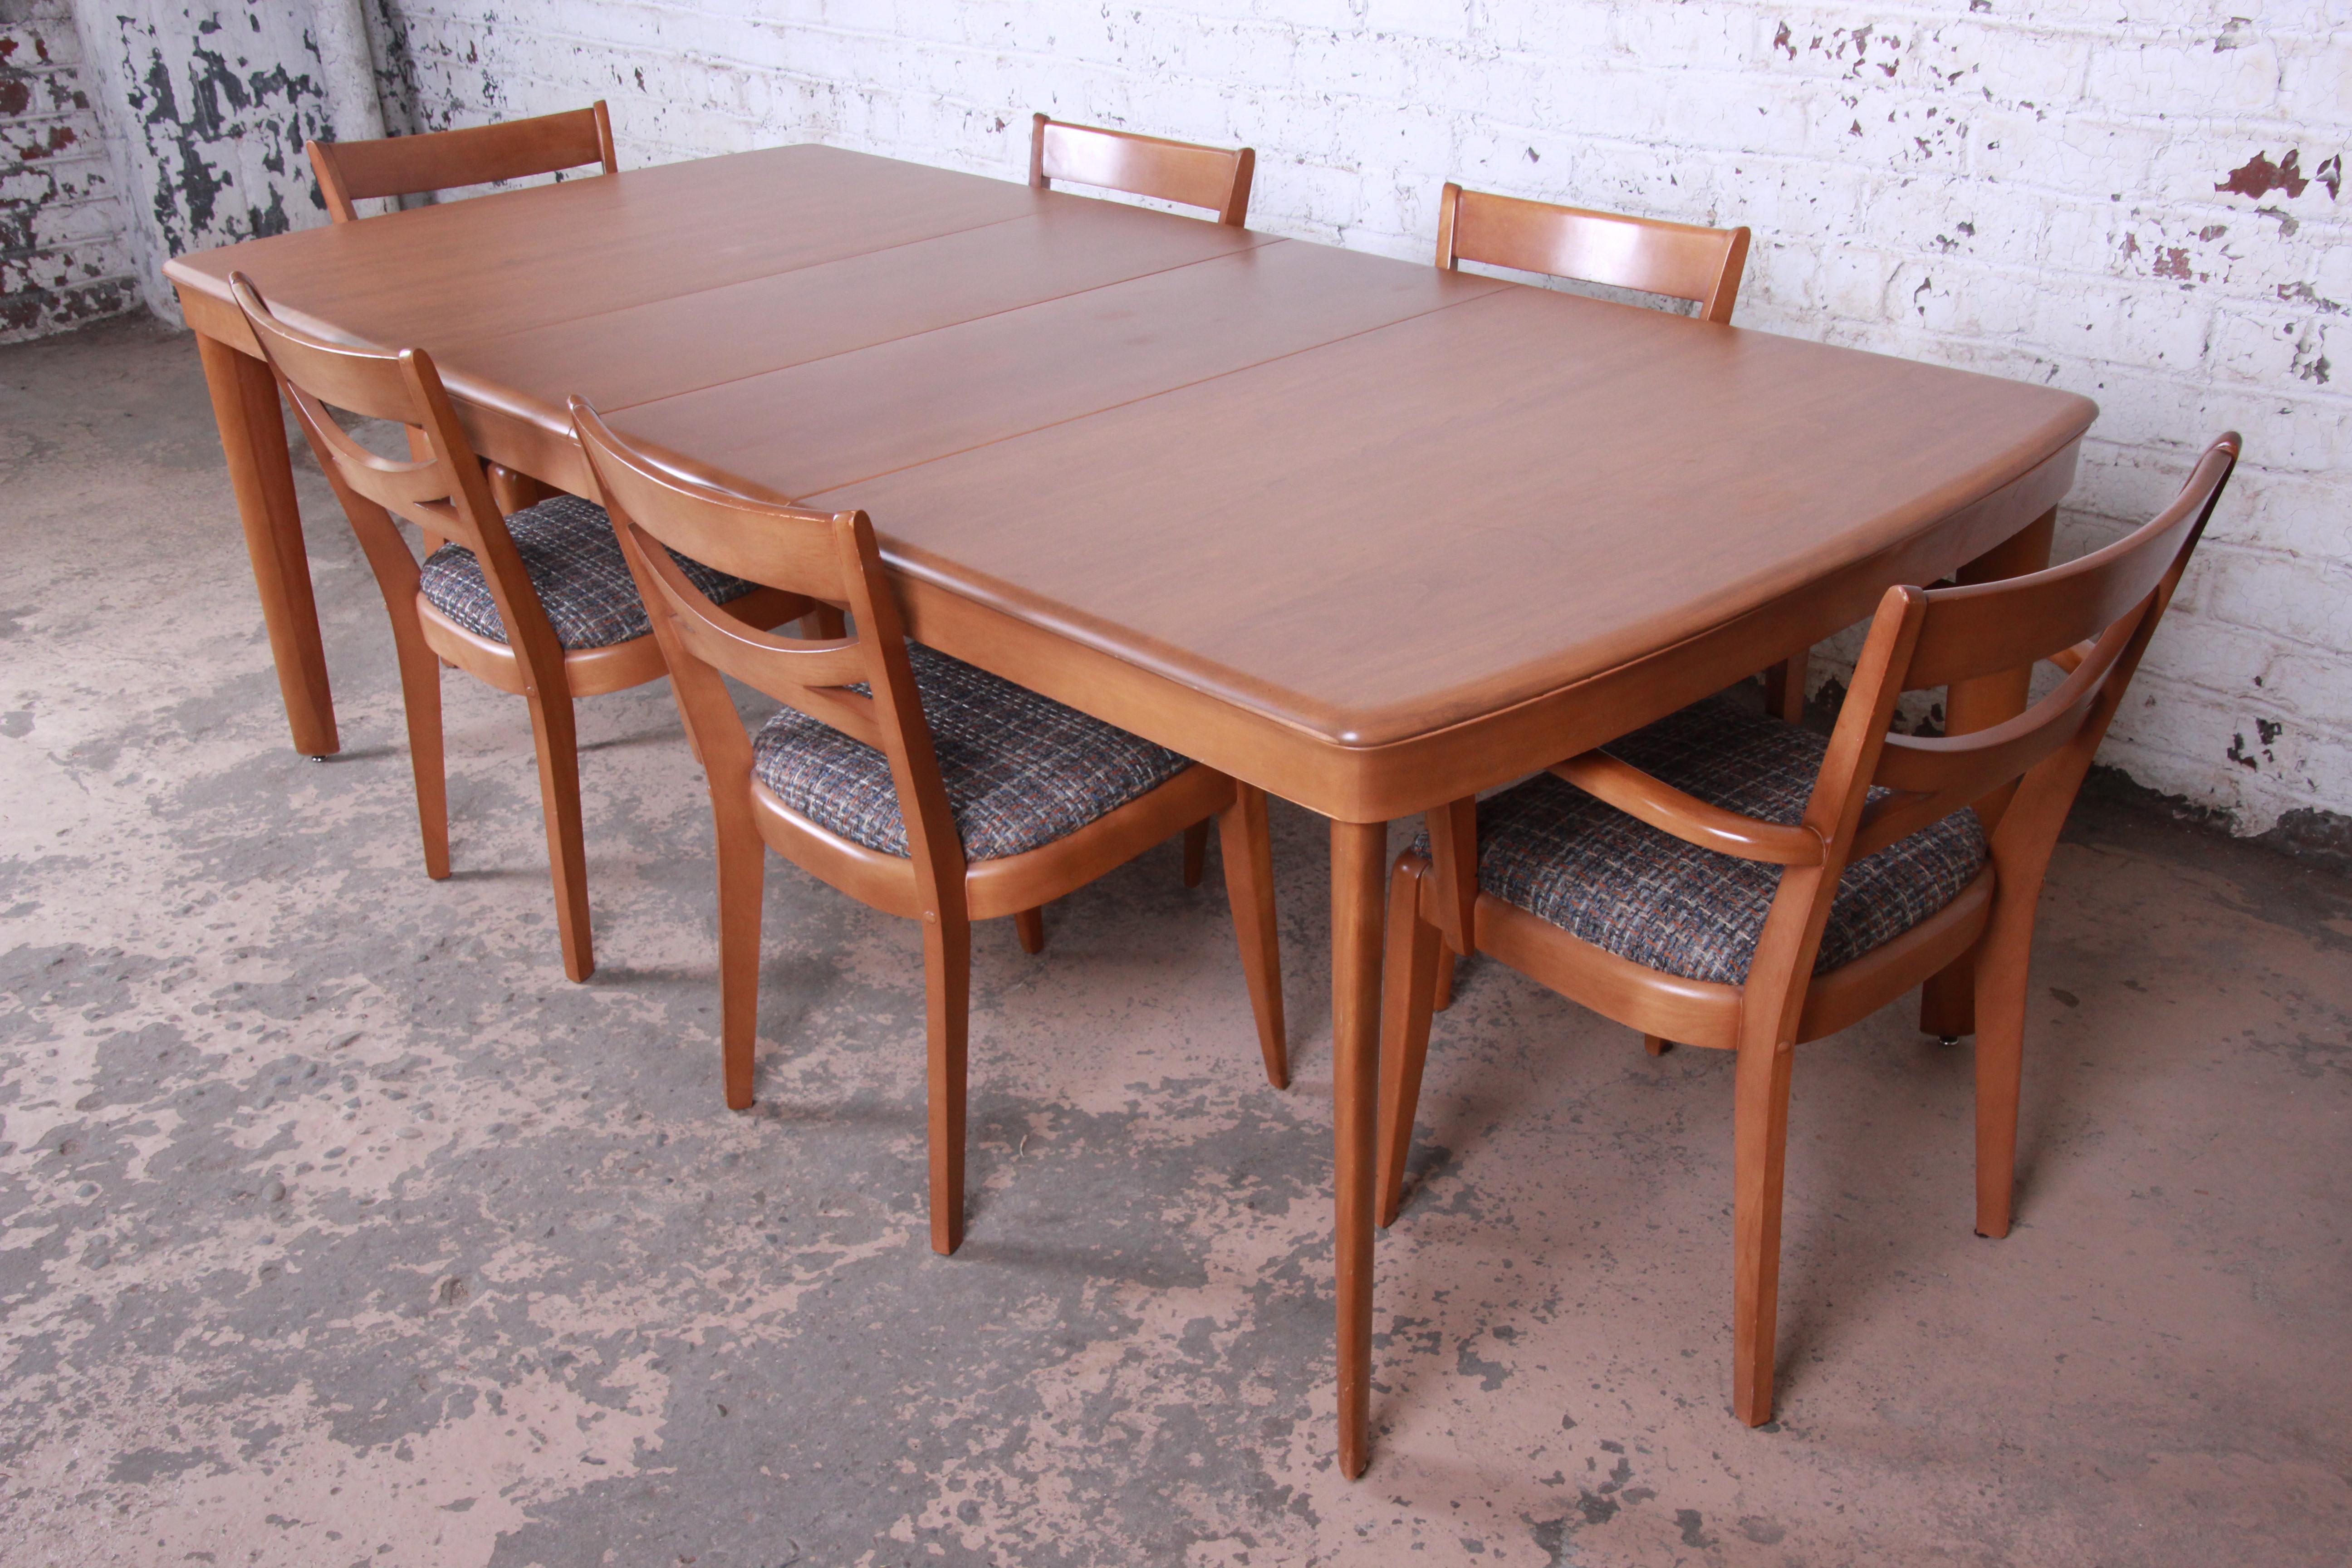 Offering a very nice Heywood Wakefield Mid-Century Modern extension dining table and 6 chairs. The set includes the dining table, two leaves, and six dining chairs. The table extends to 90.5